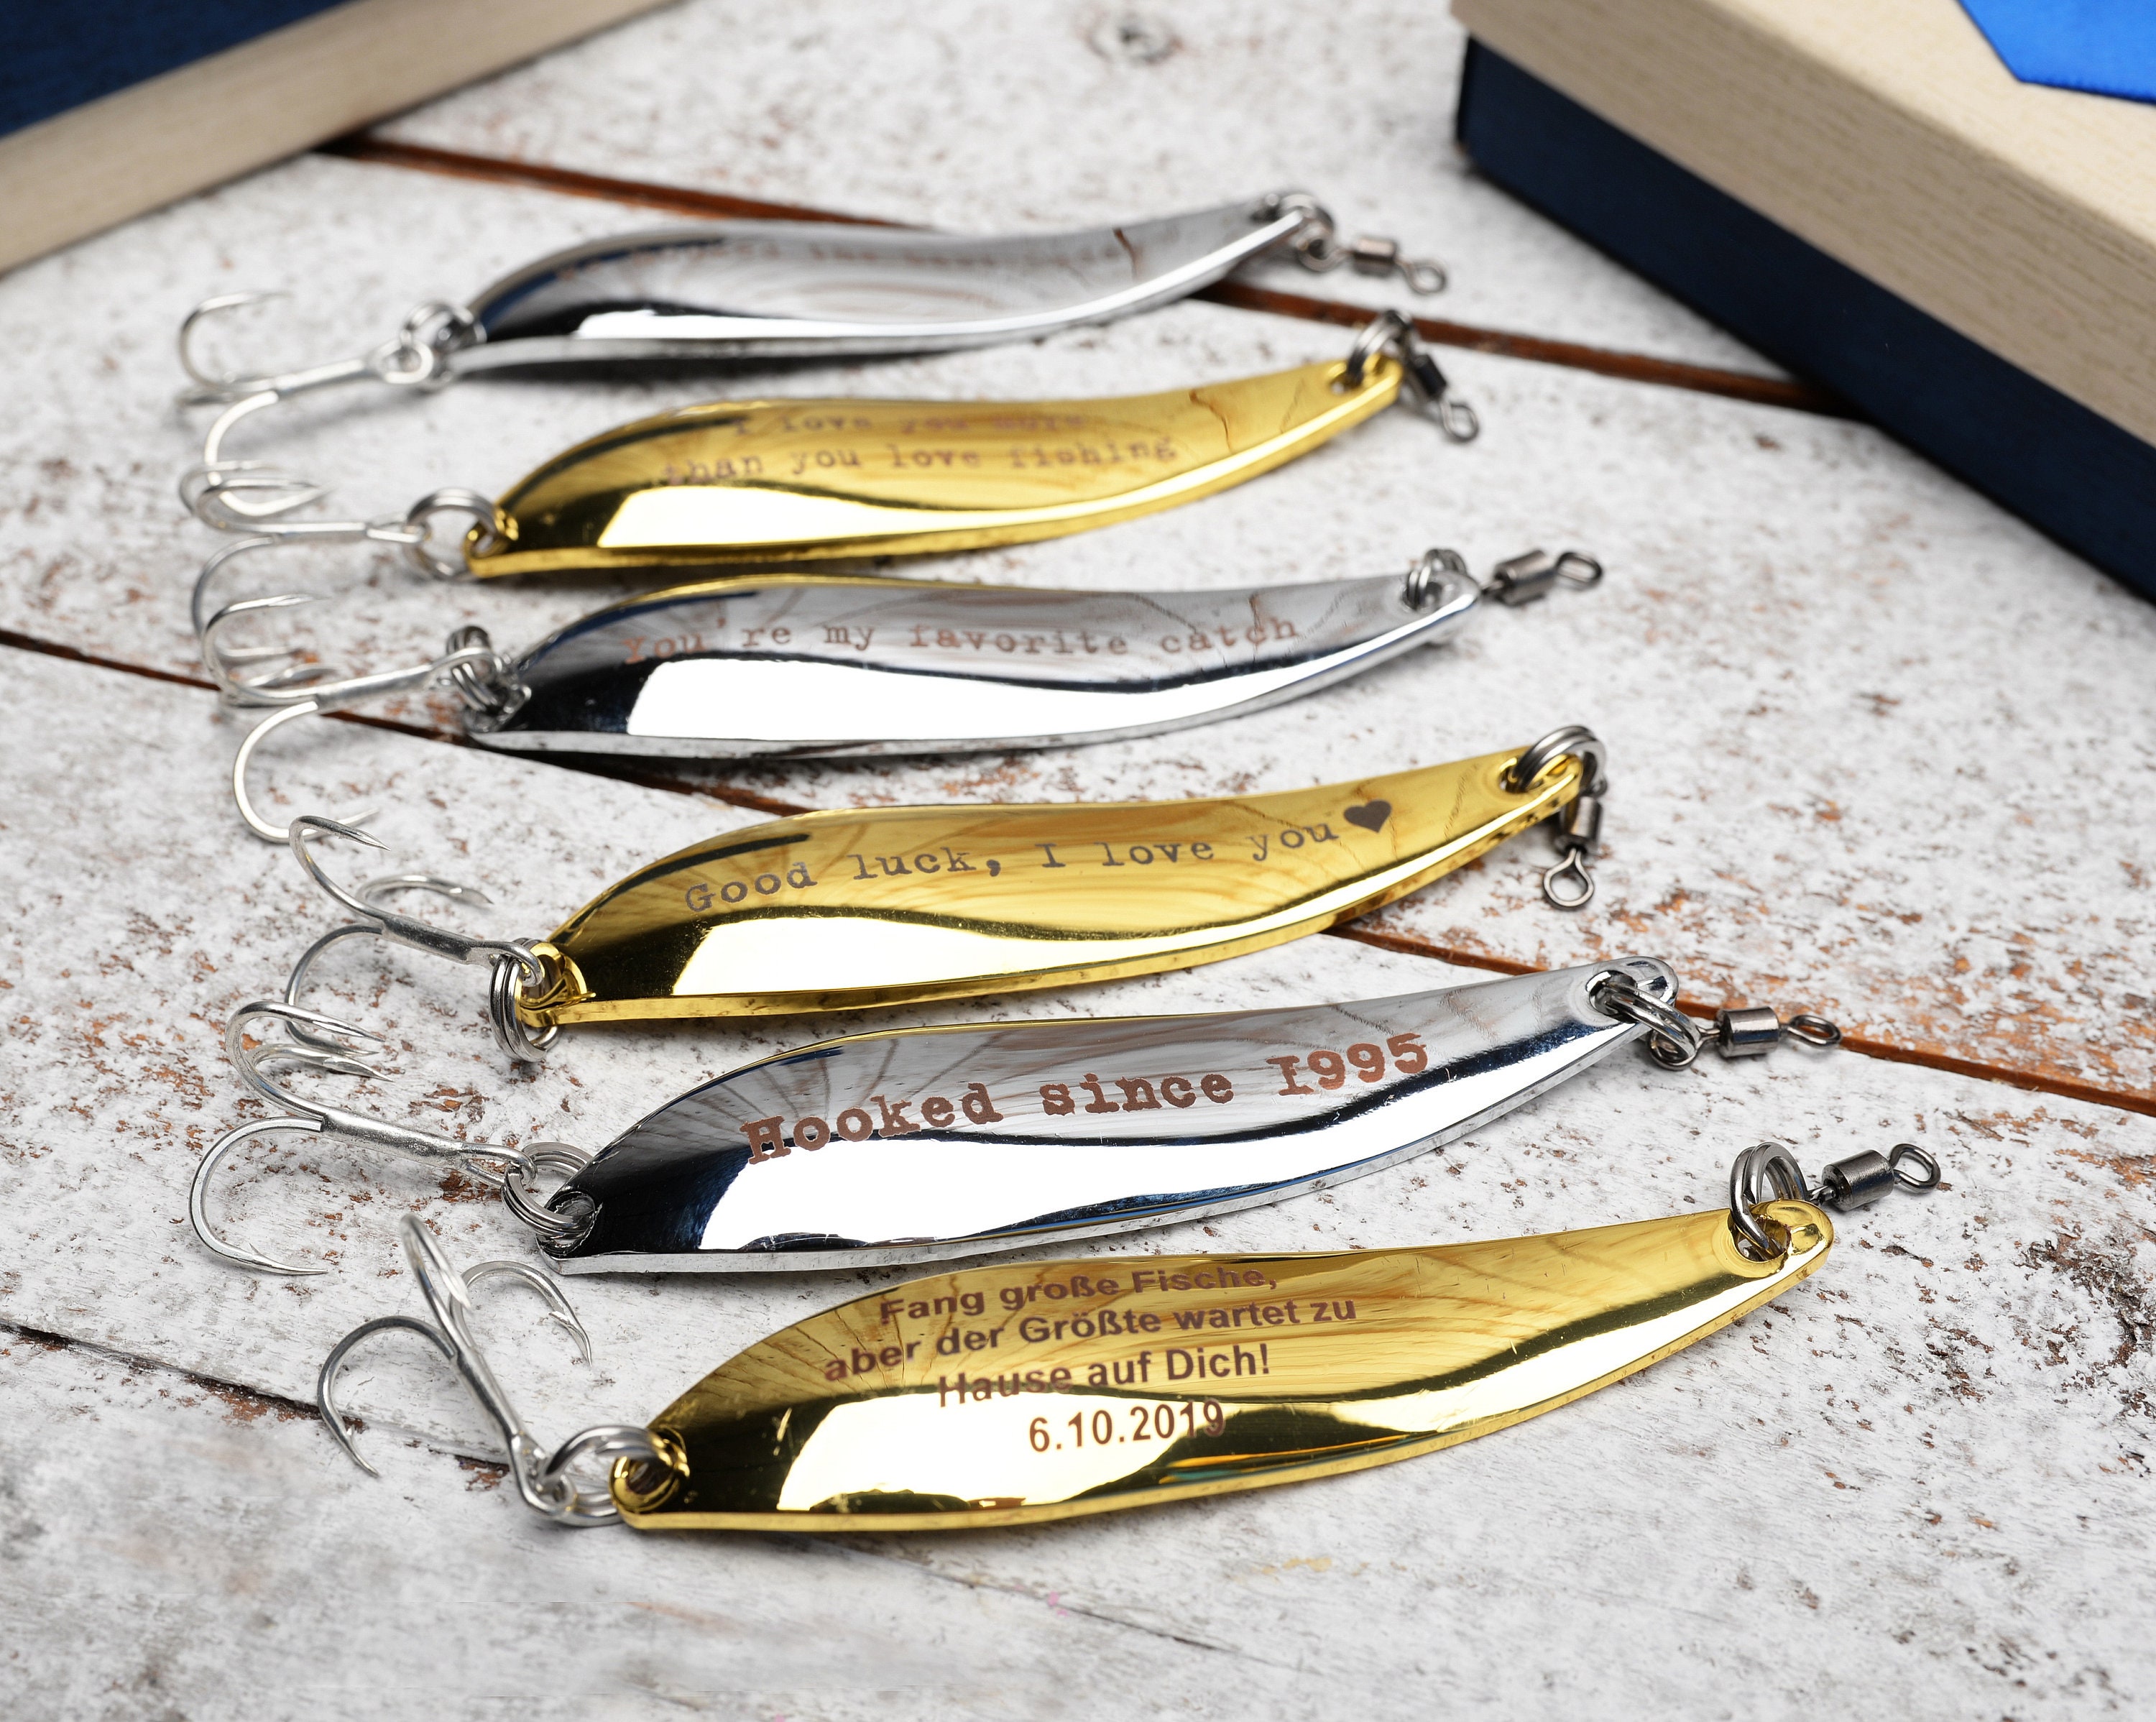 Fisherman Gift Ideas Fishing Gift Father's Day Gift Anglers Men